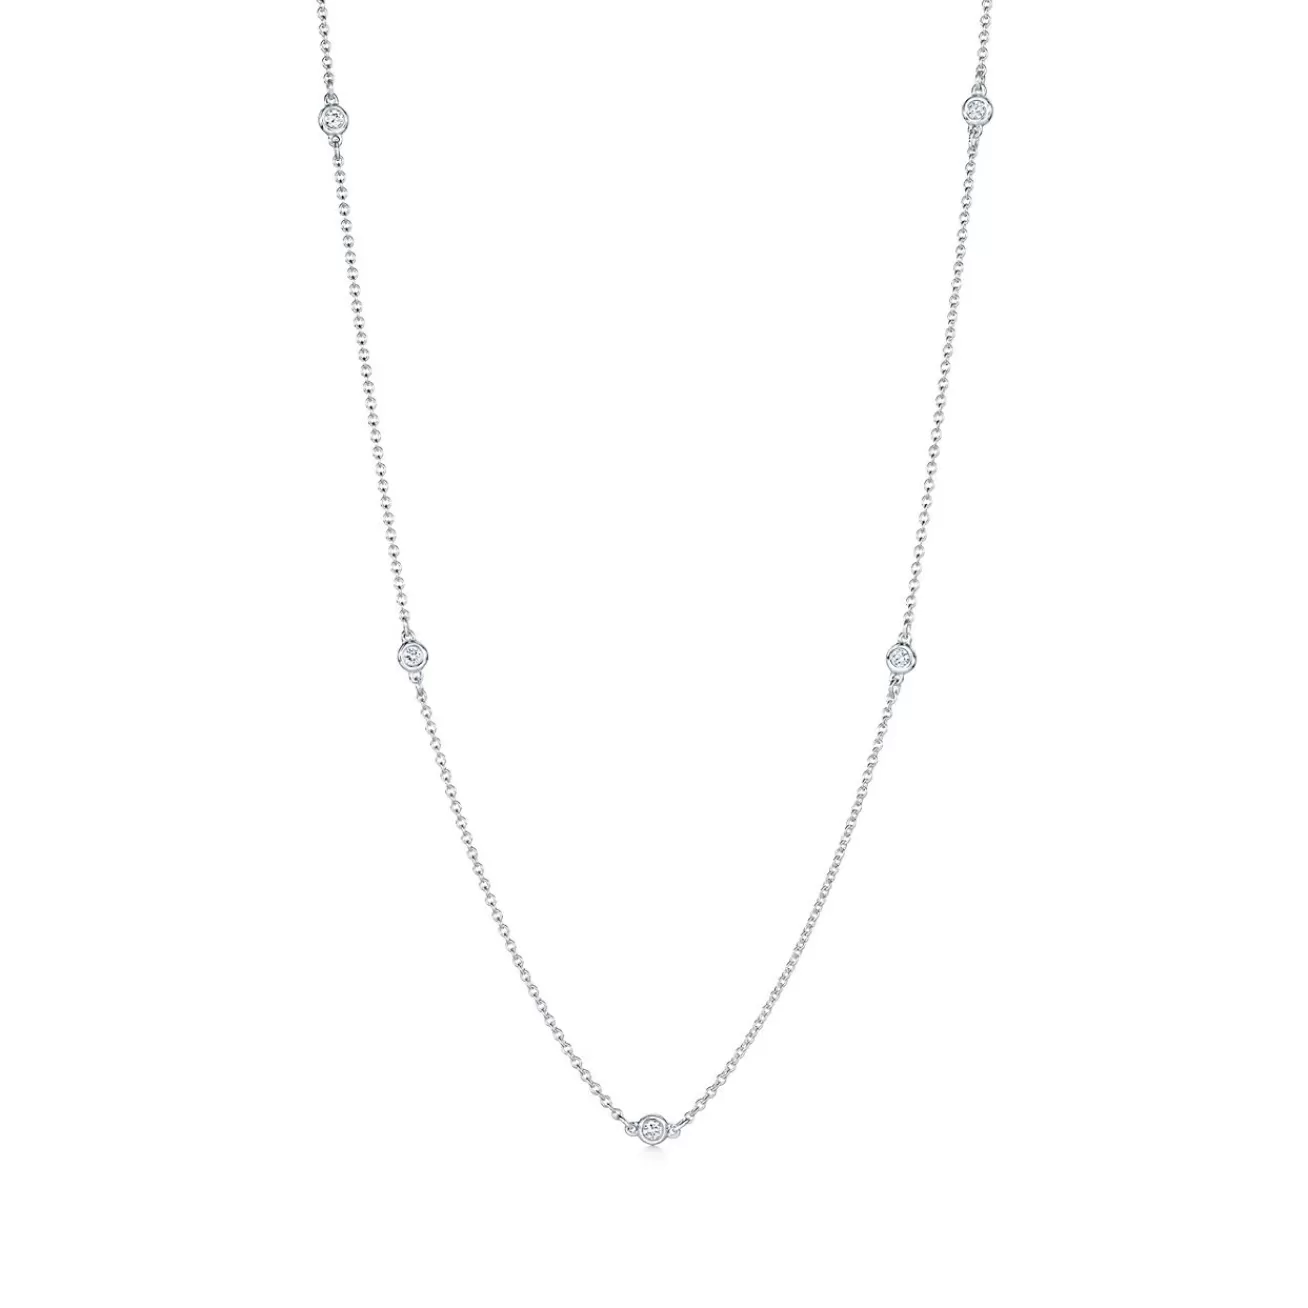 Tiffany & Co. Elsa Peretti® Diamonds by the Yard® necklace in sterling silver. | ^ Necklaces & Pendants | Sterling Silver Jewelry